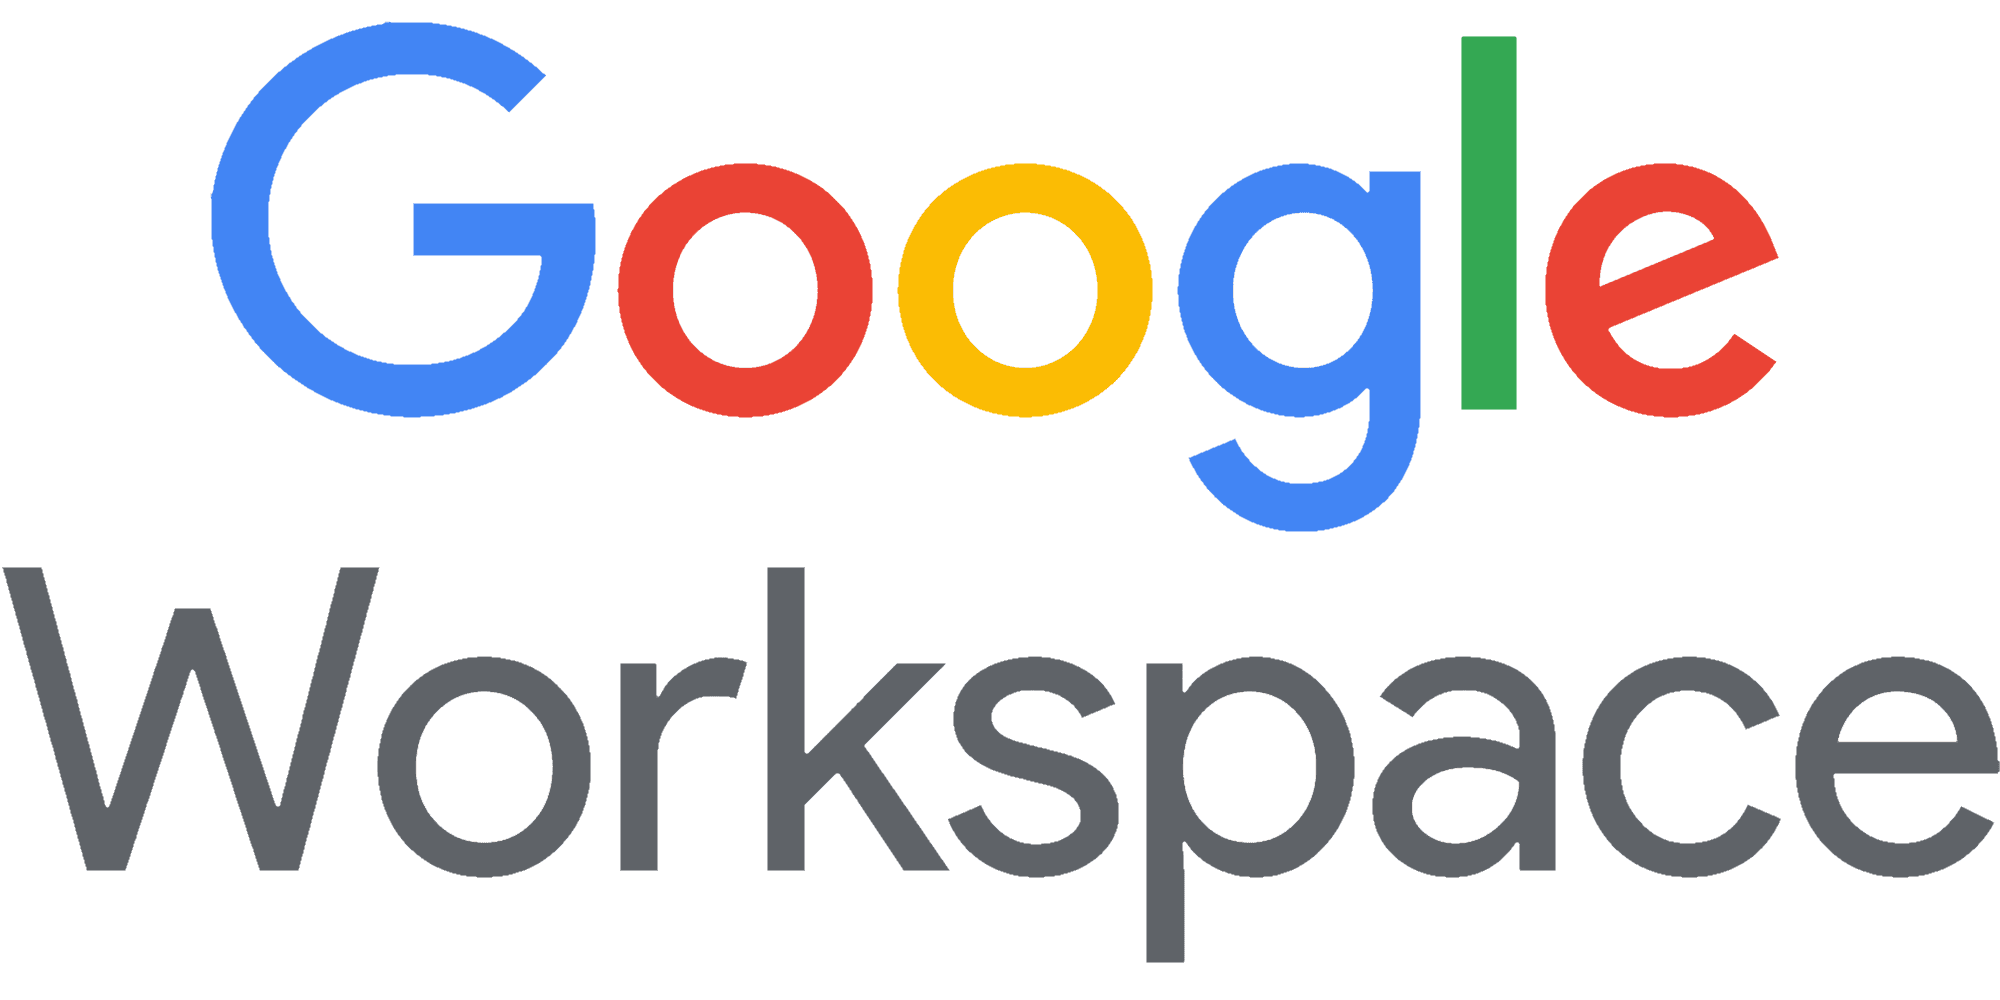 Google Workspace" logo in bold, with "Google" in colorful letters and "Workspace" in gray letters.